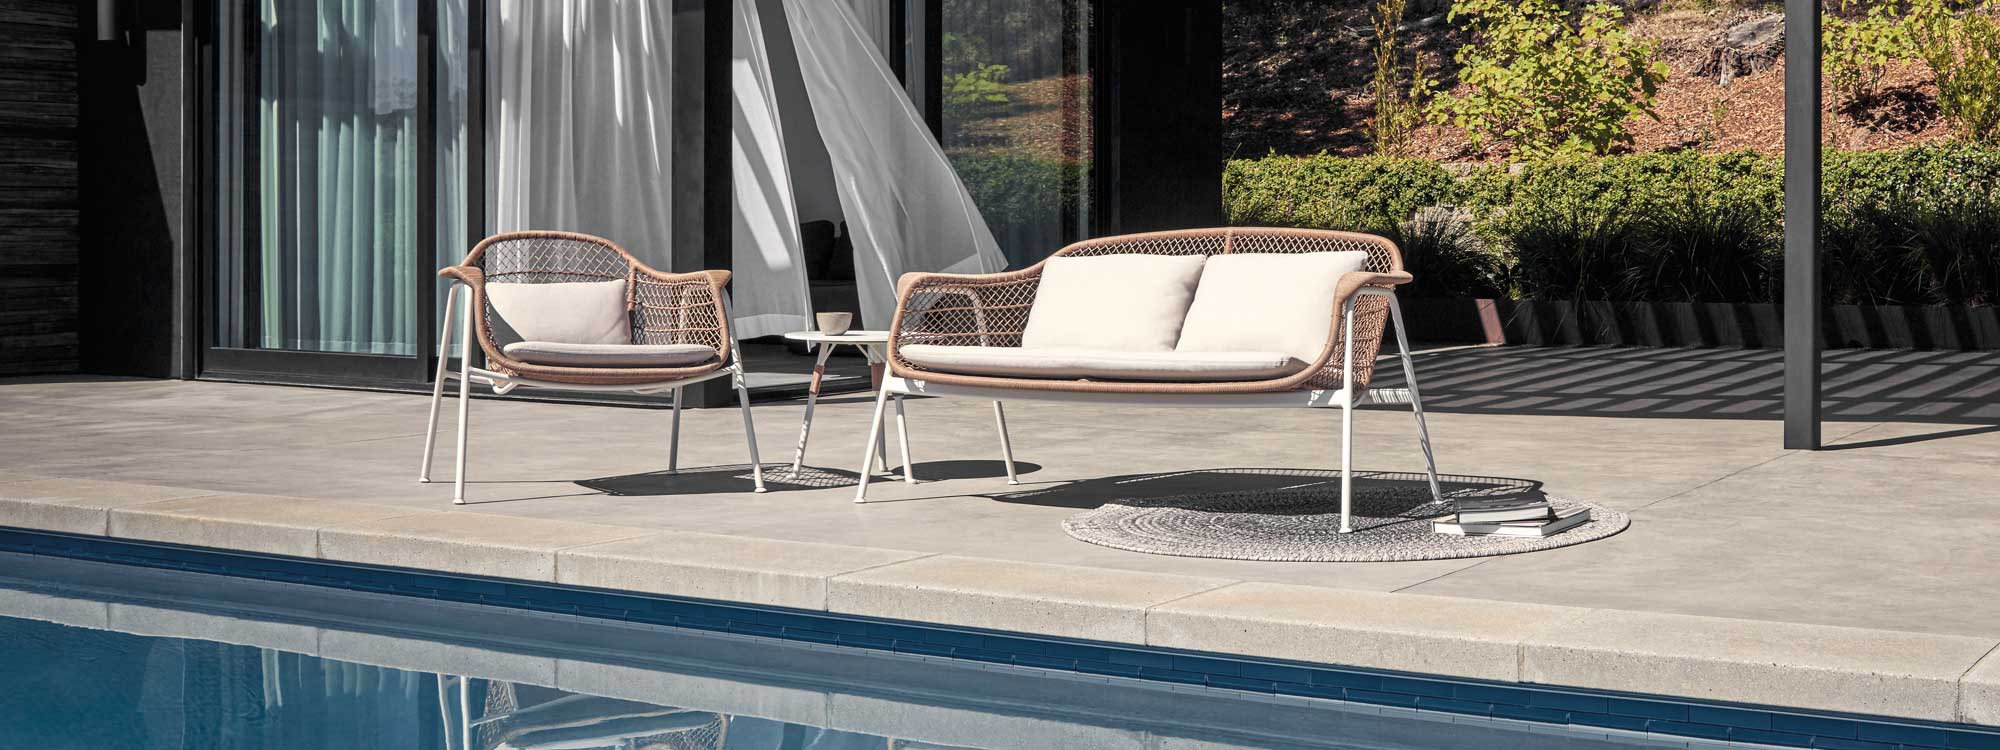 Image of Gloster Fresco retro garden sofa and lounge chair in white tubular aluminium and Wheat coloured all-weather wicker